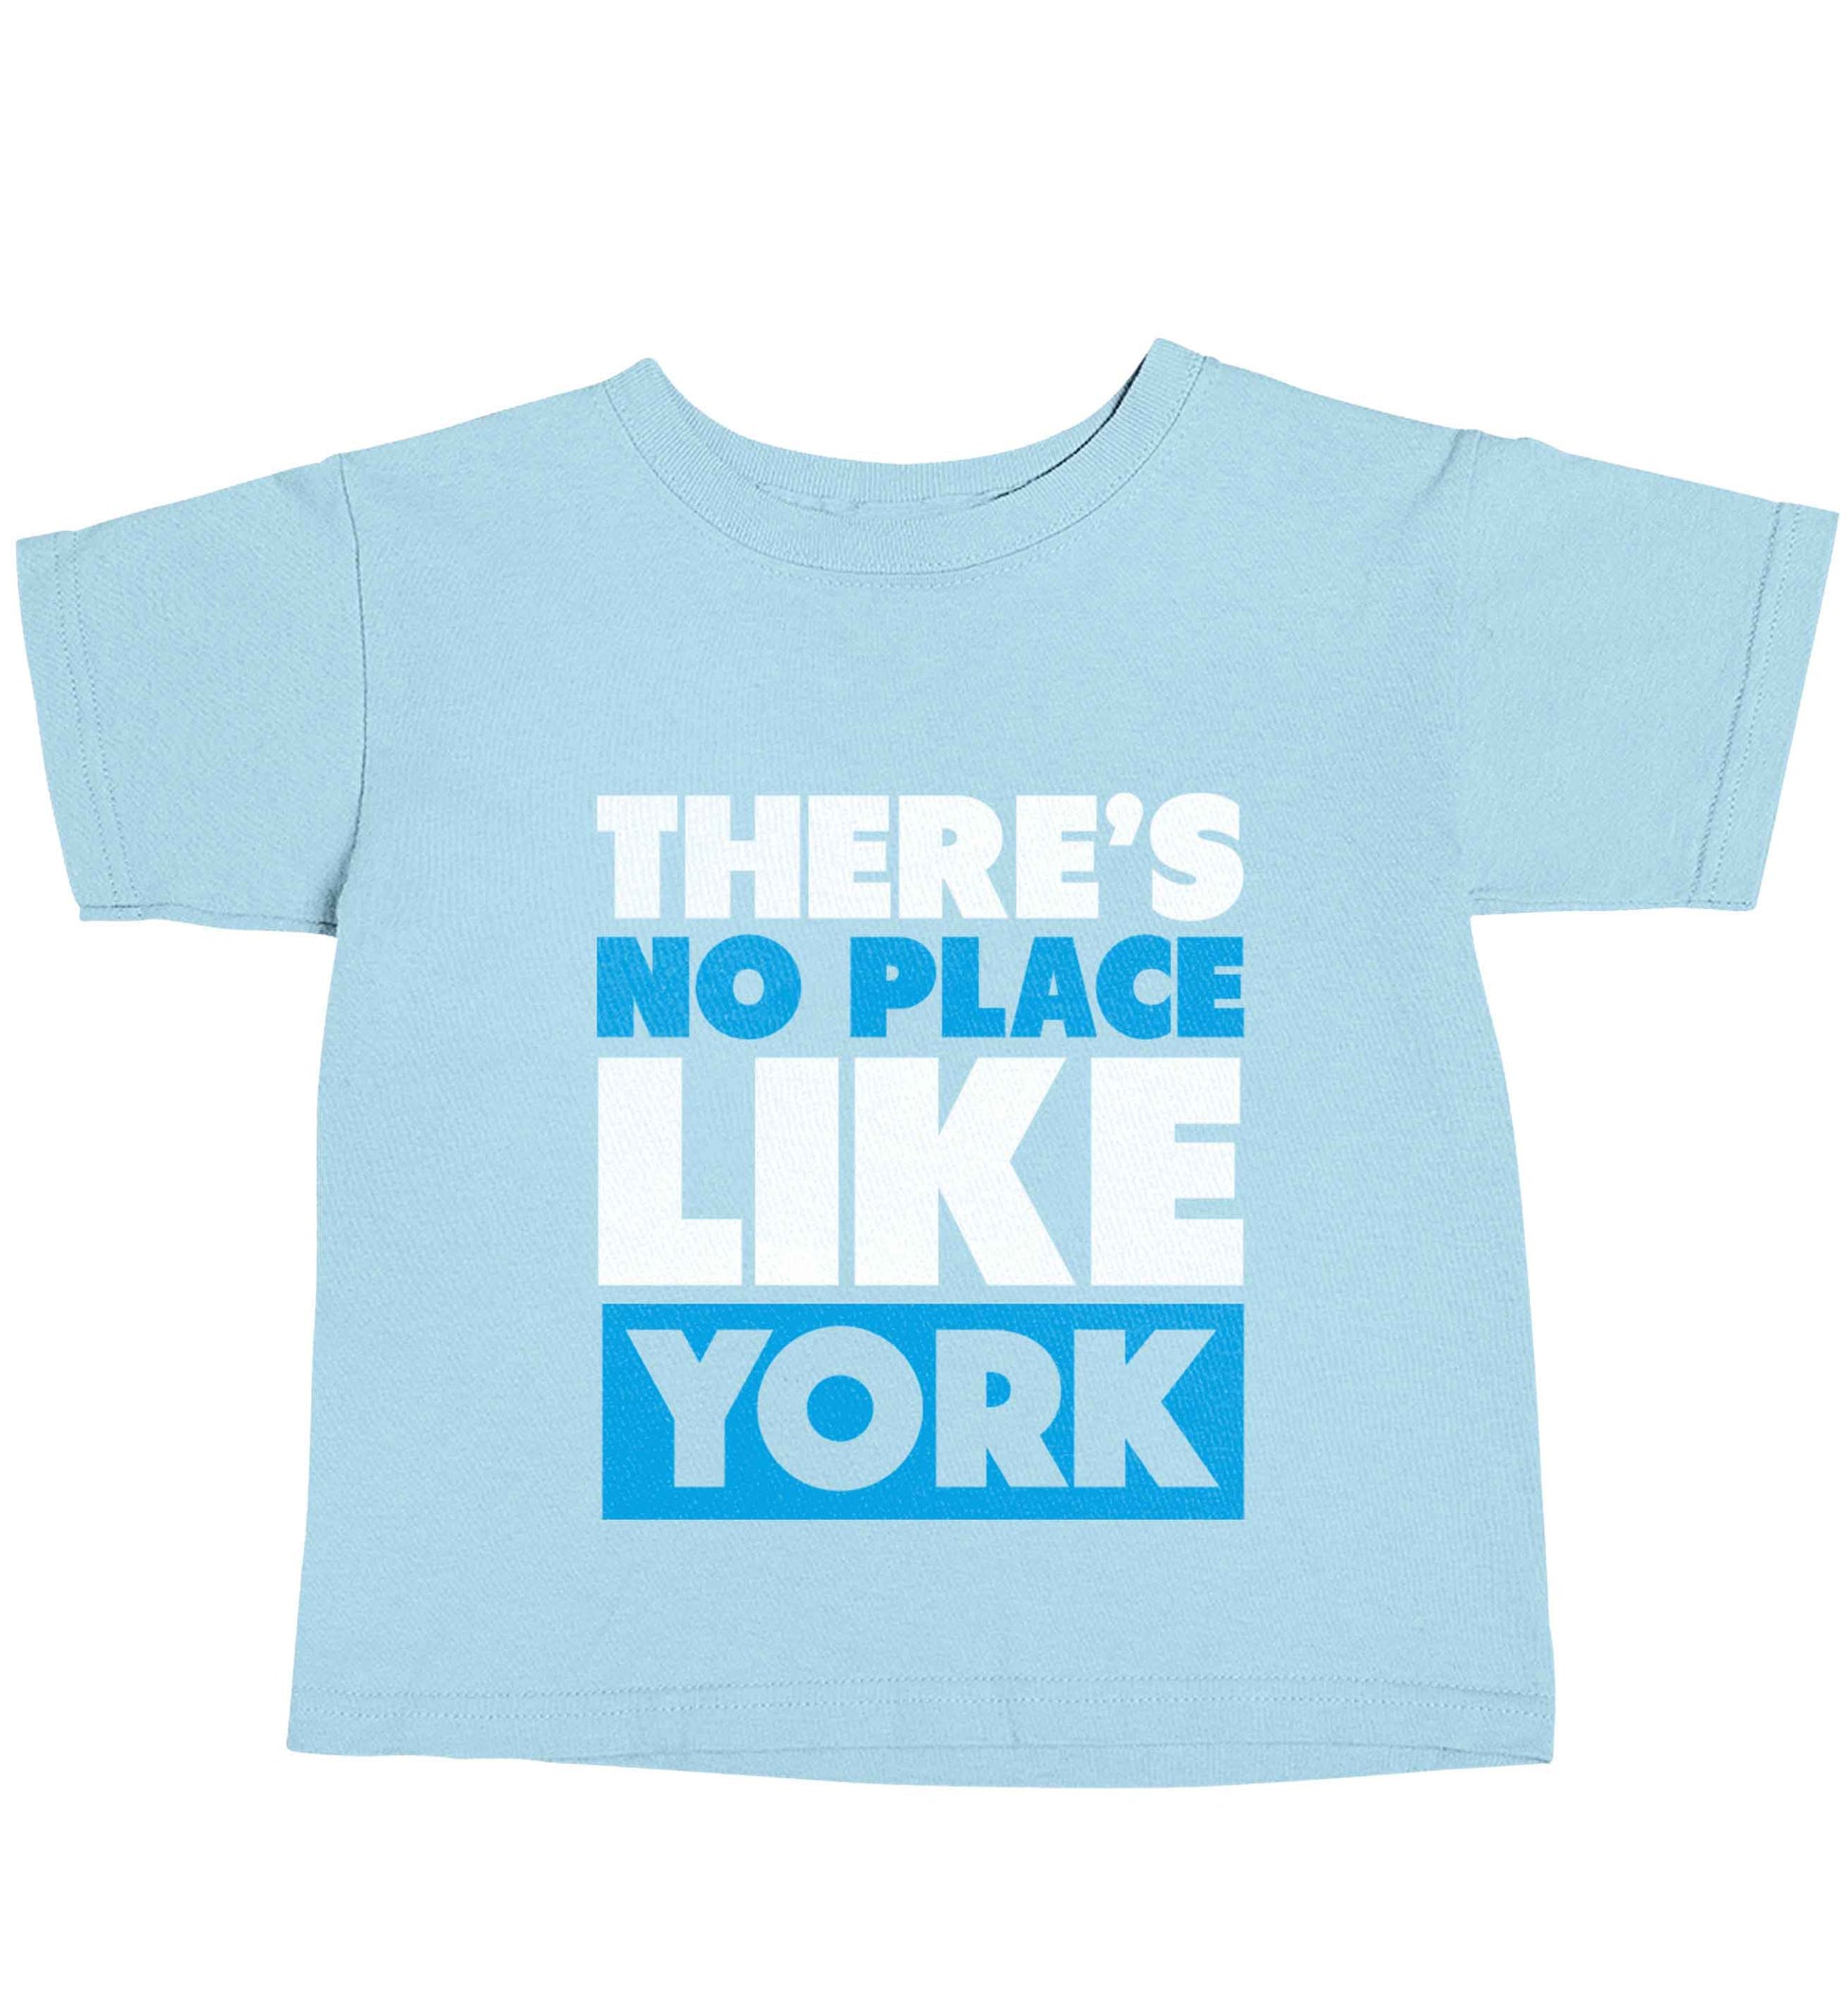 There's no place like york light blue baby toddler Tshirt 2 Years